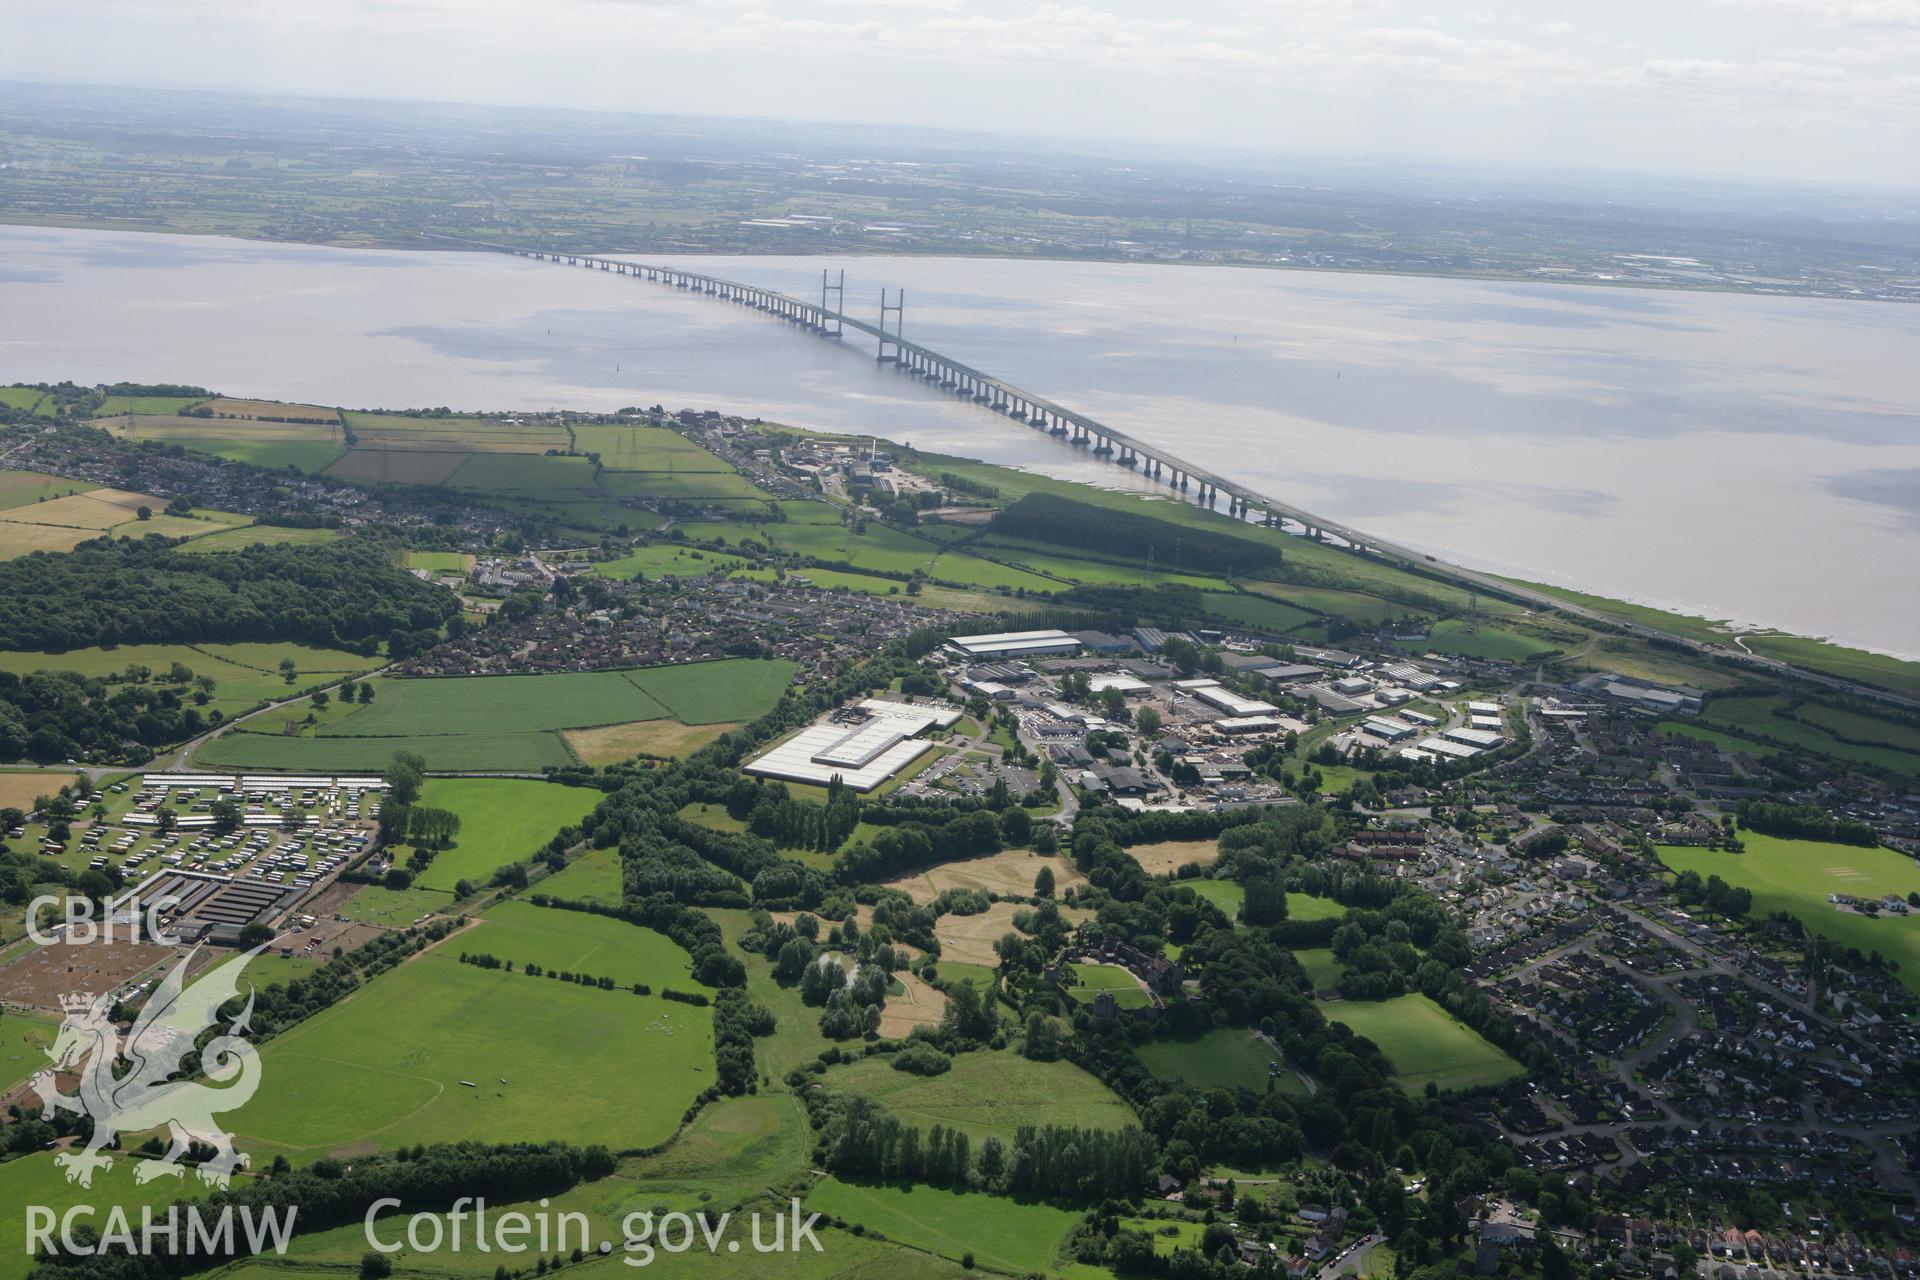 RCAHMW colour oblique photograph of the Second Severn Crossing (M4 Motorway). Taken by Toby Driver on 21/07/2008.